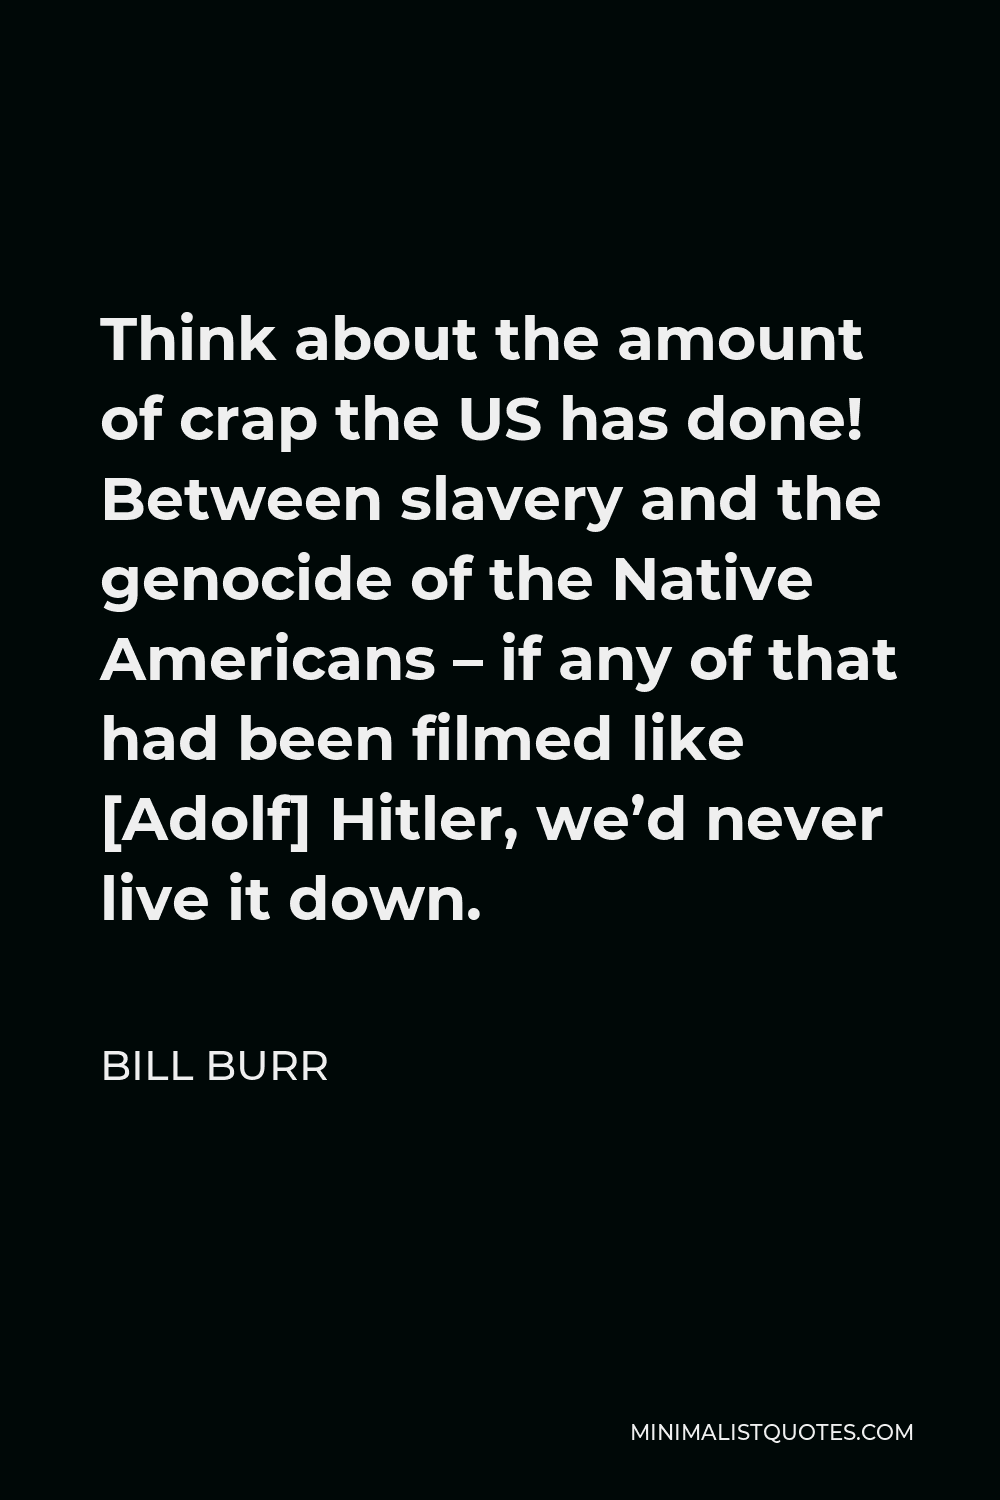 Bill Burr Quote - Think about the amount of crap the US has done! Between slavery and the genocide of the Native Americans – if any of that had been filmed like [Adolf] Hitler, we’d never live it down.